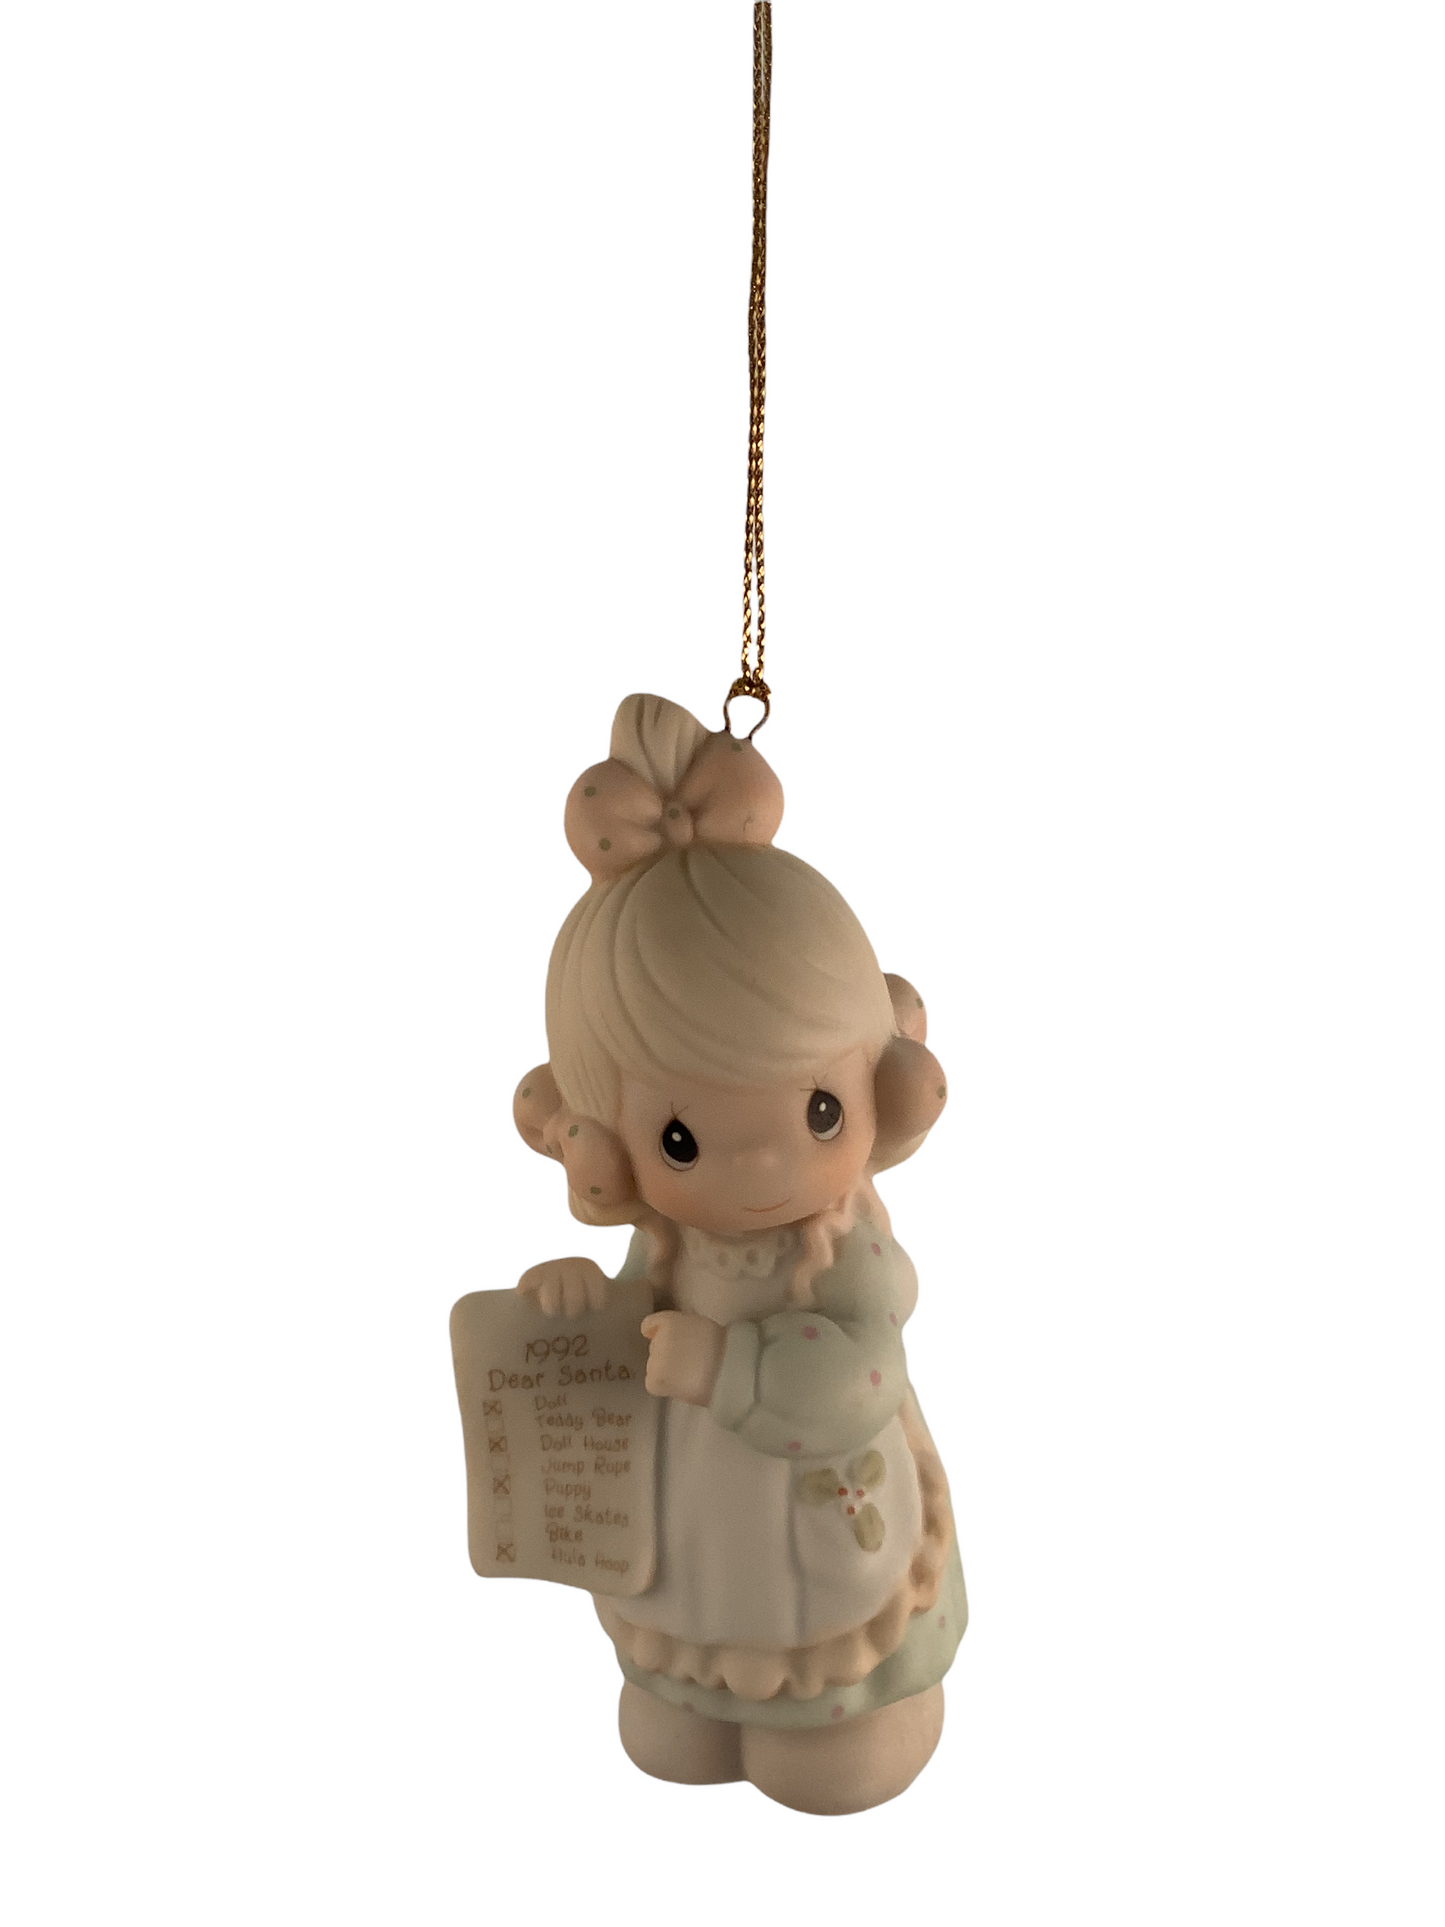 But The Greatest Of These Is Love - 1992 Dated Annual Precious Moment Ornament